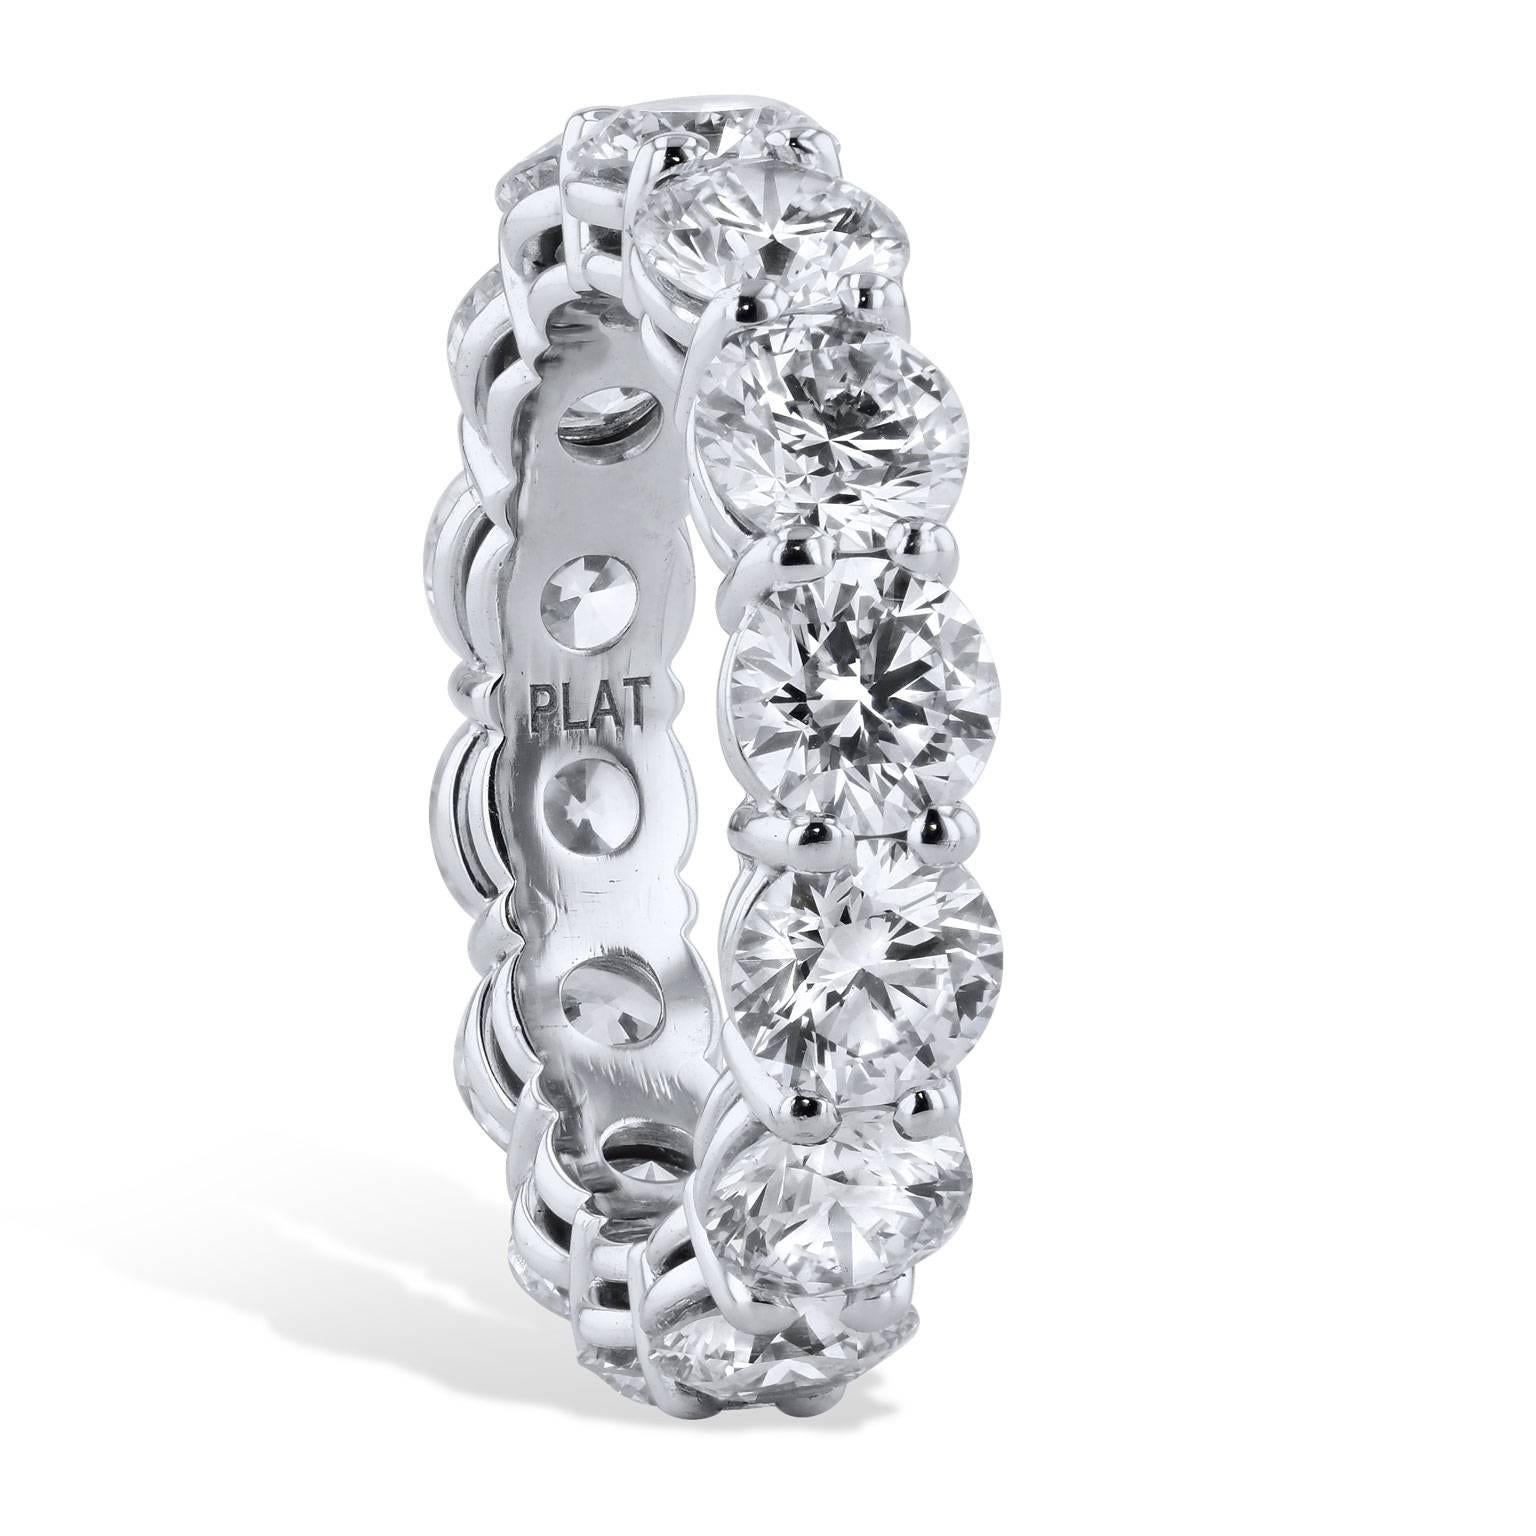 Handmade 5.83 Carat Diamond Shared-Prong Eternity Band Ring

Platinum eternity band ring featuring an impressive 5.83 carat of round diamond in shared-prong setting in color H/I and clarity VS2/SI1.

Size 6